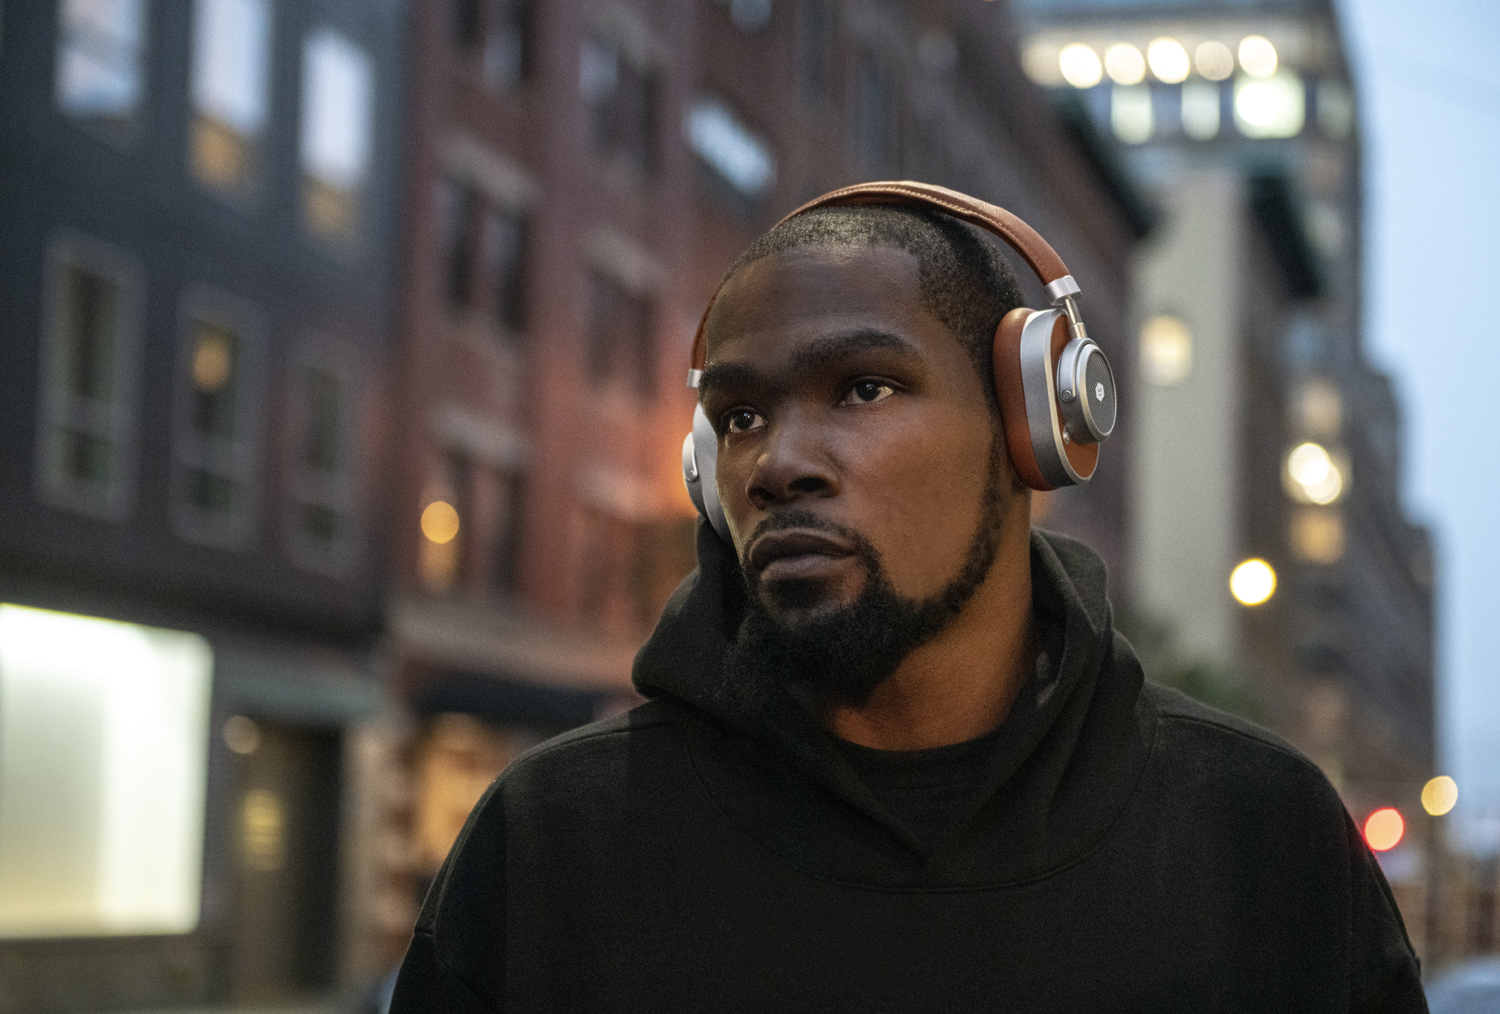 On the street wearing MW65 Active Noise-Cancelling Wireless Headphones